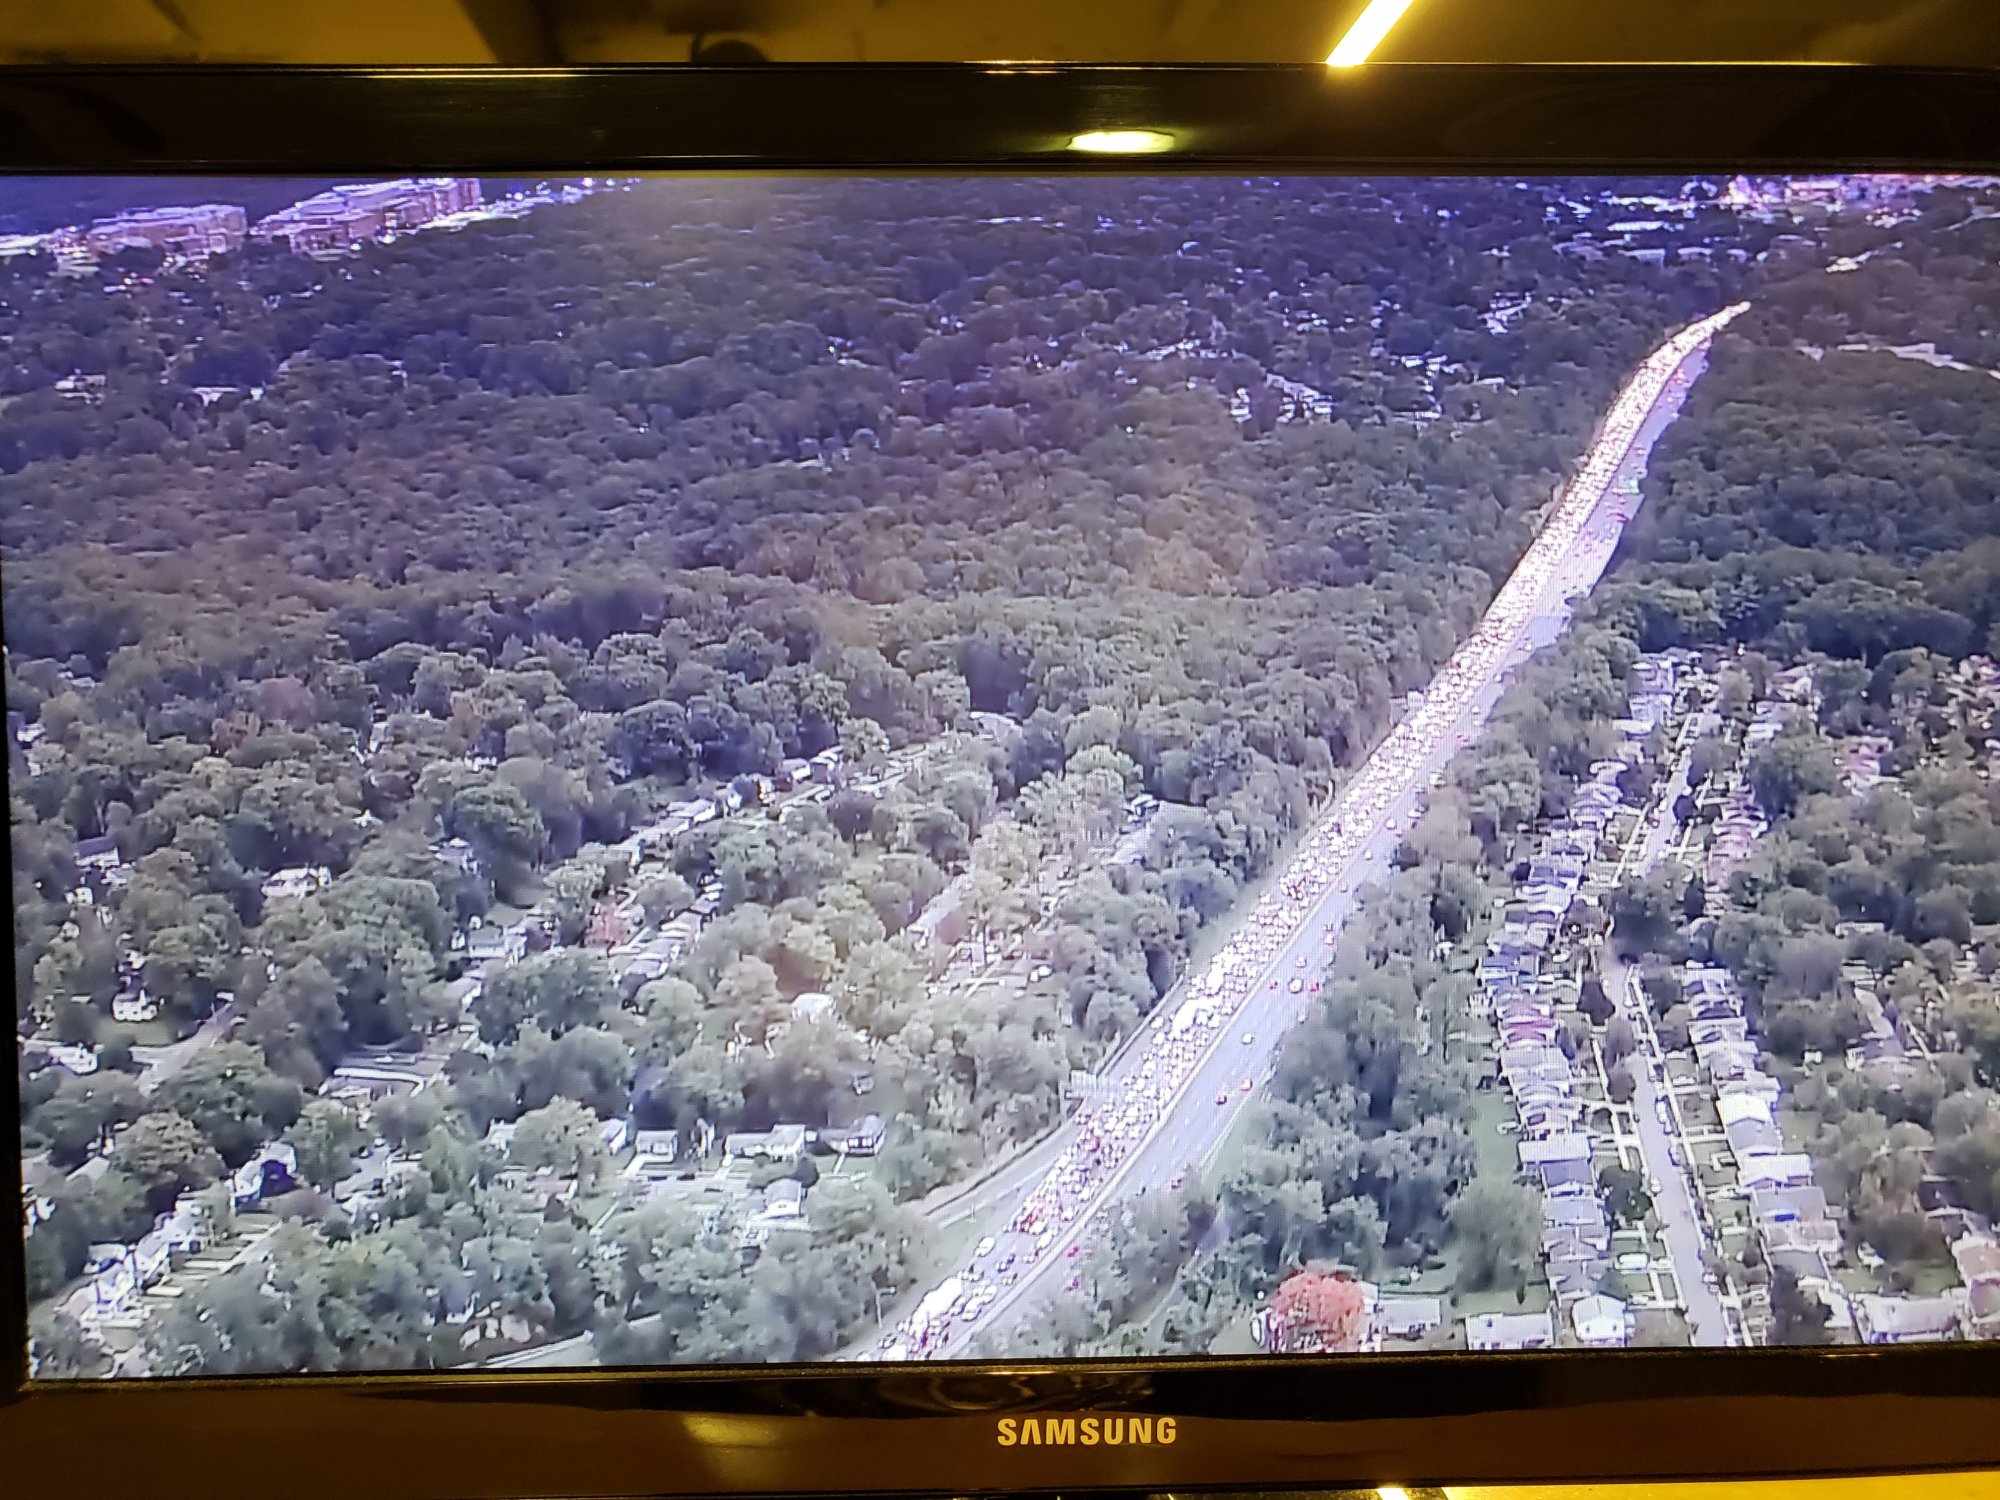 At 7 a.m., WTOP Traffic reports the backup was about 7 miles lines long, starting near New Hampshire Avenue. (WTOP/NBC Chopper)
